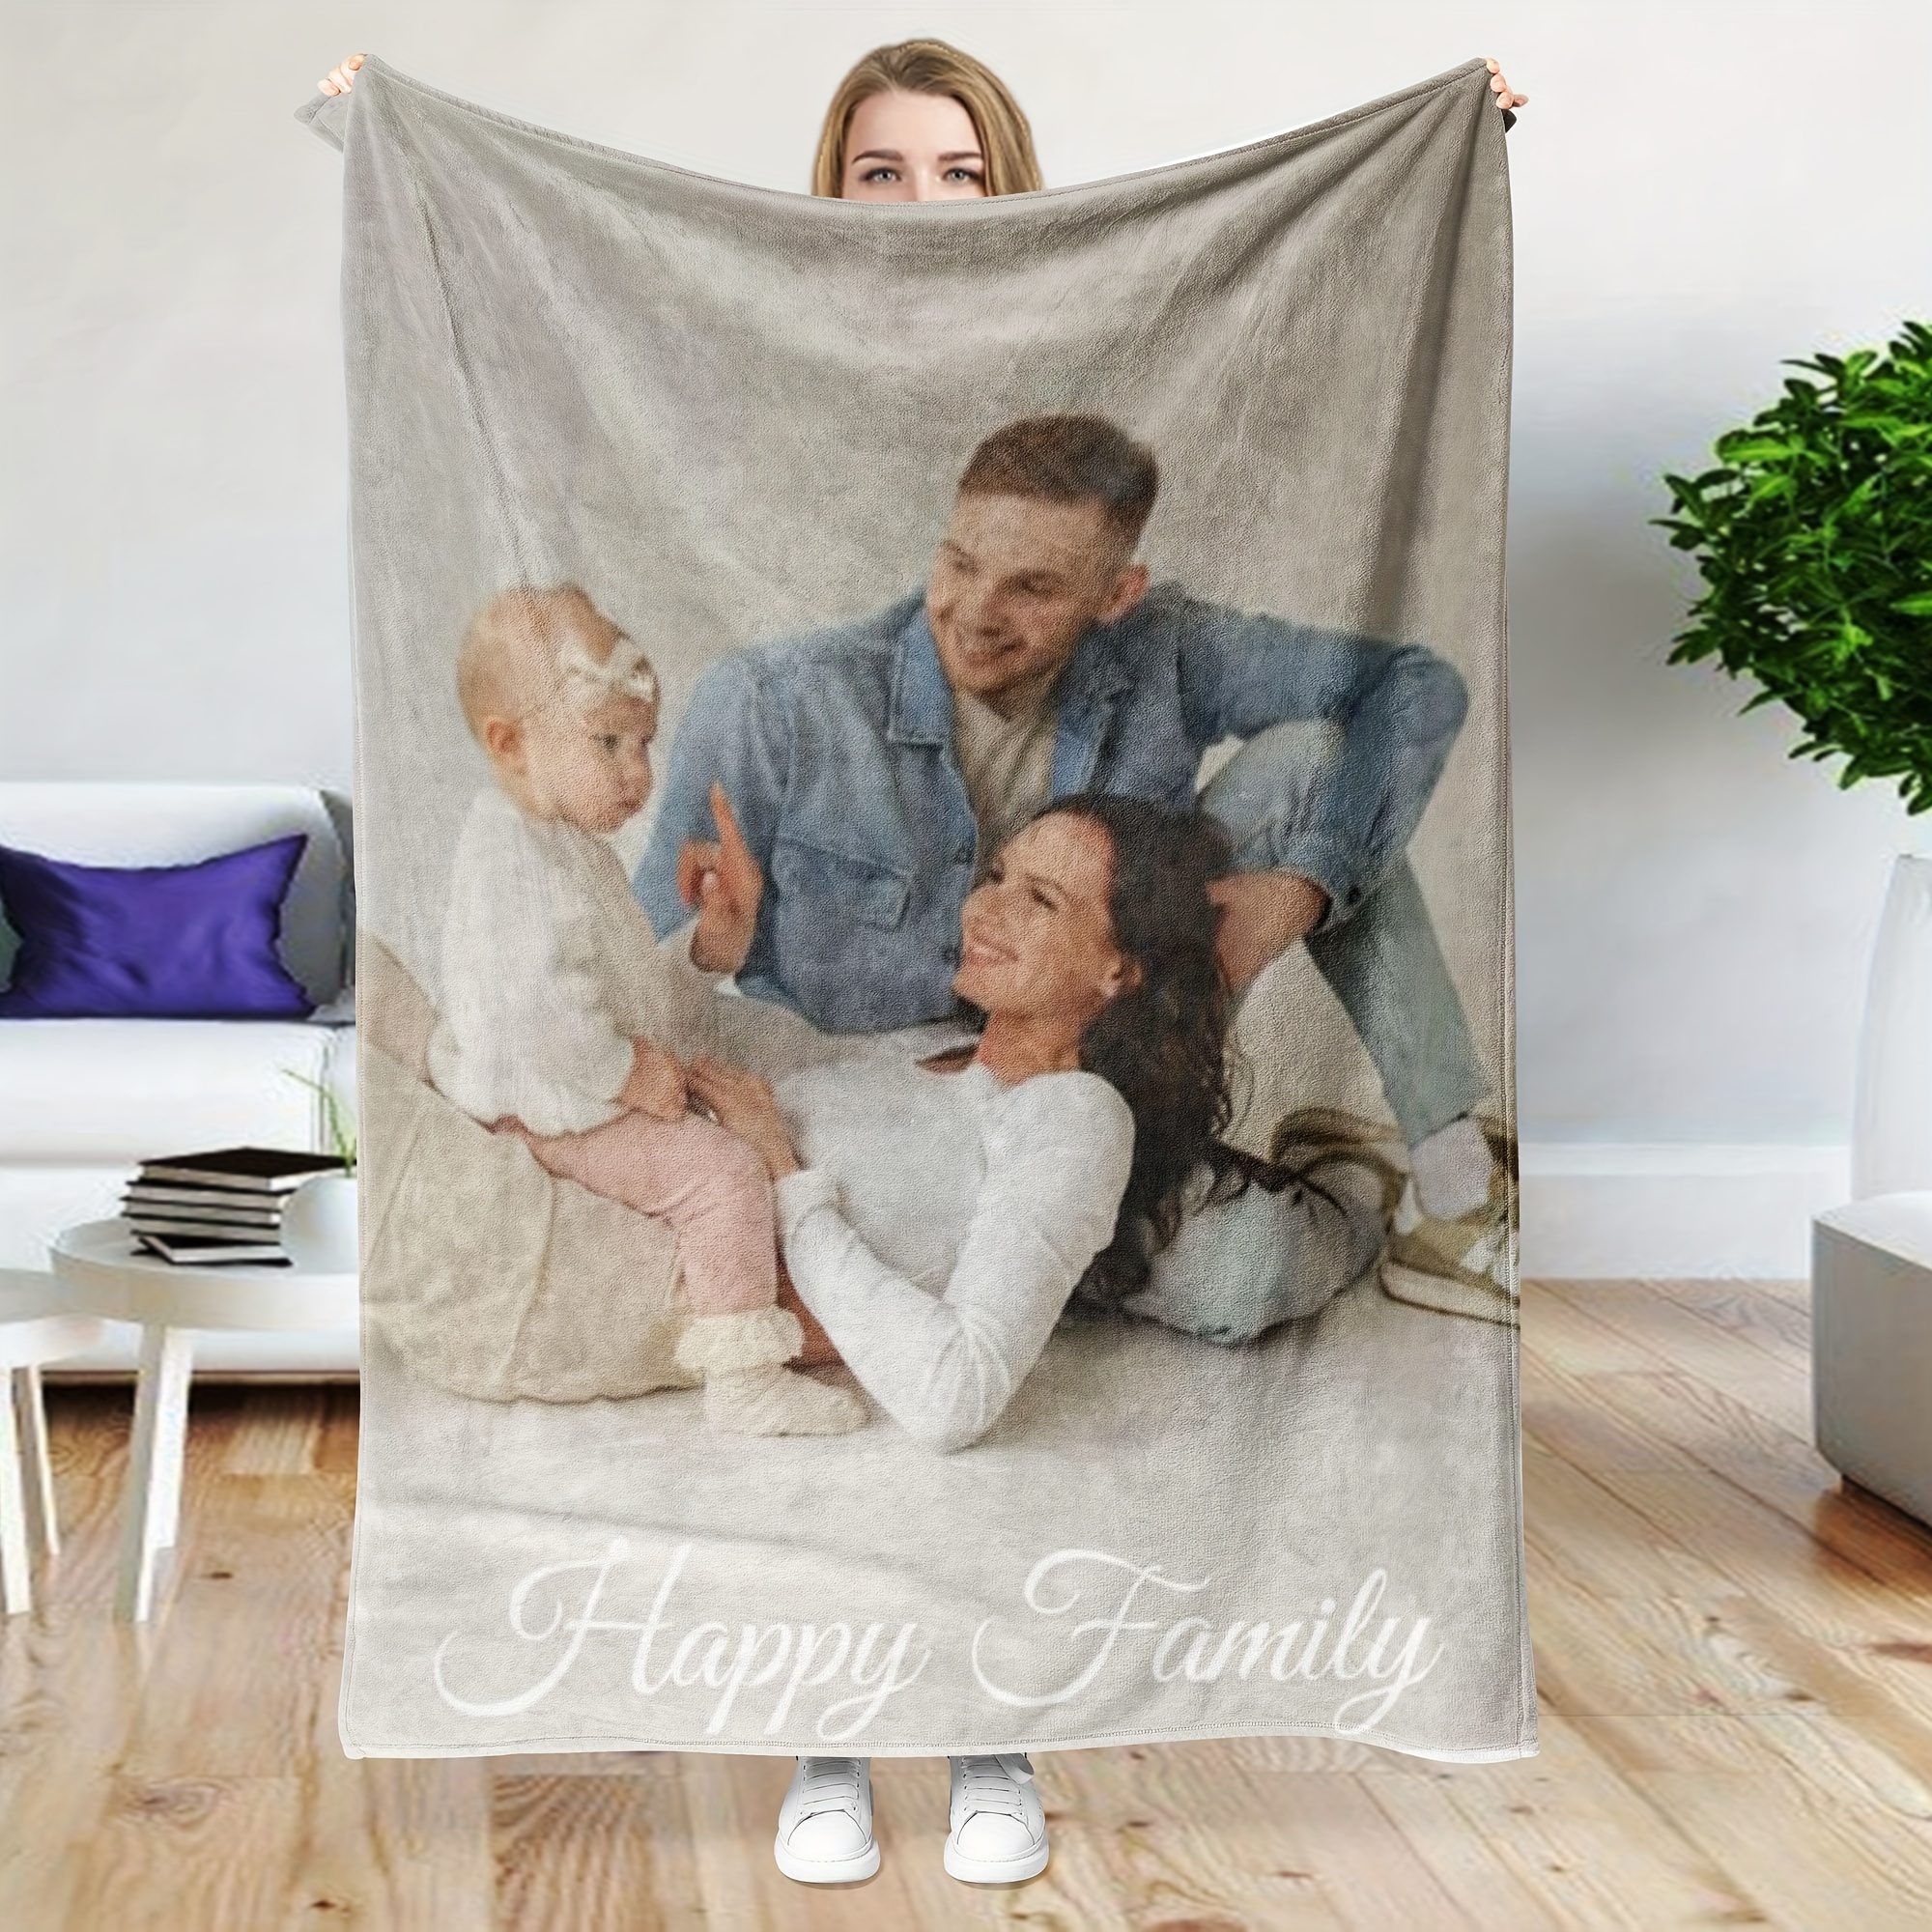 

1pc Custom Blanket With Photos Personalized Customized Blanket For Valentine's Day Gift For Husband Wife Girlfriend Boyfriend Father Mother's Day Christmas Photo